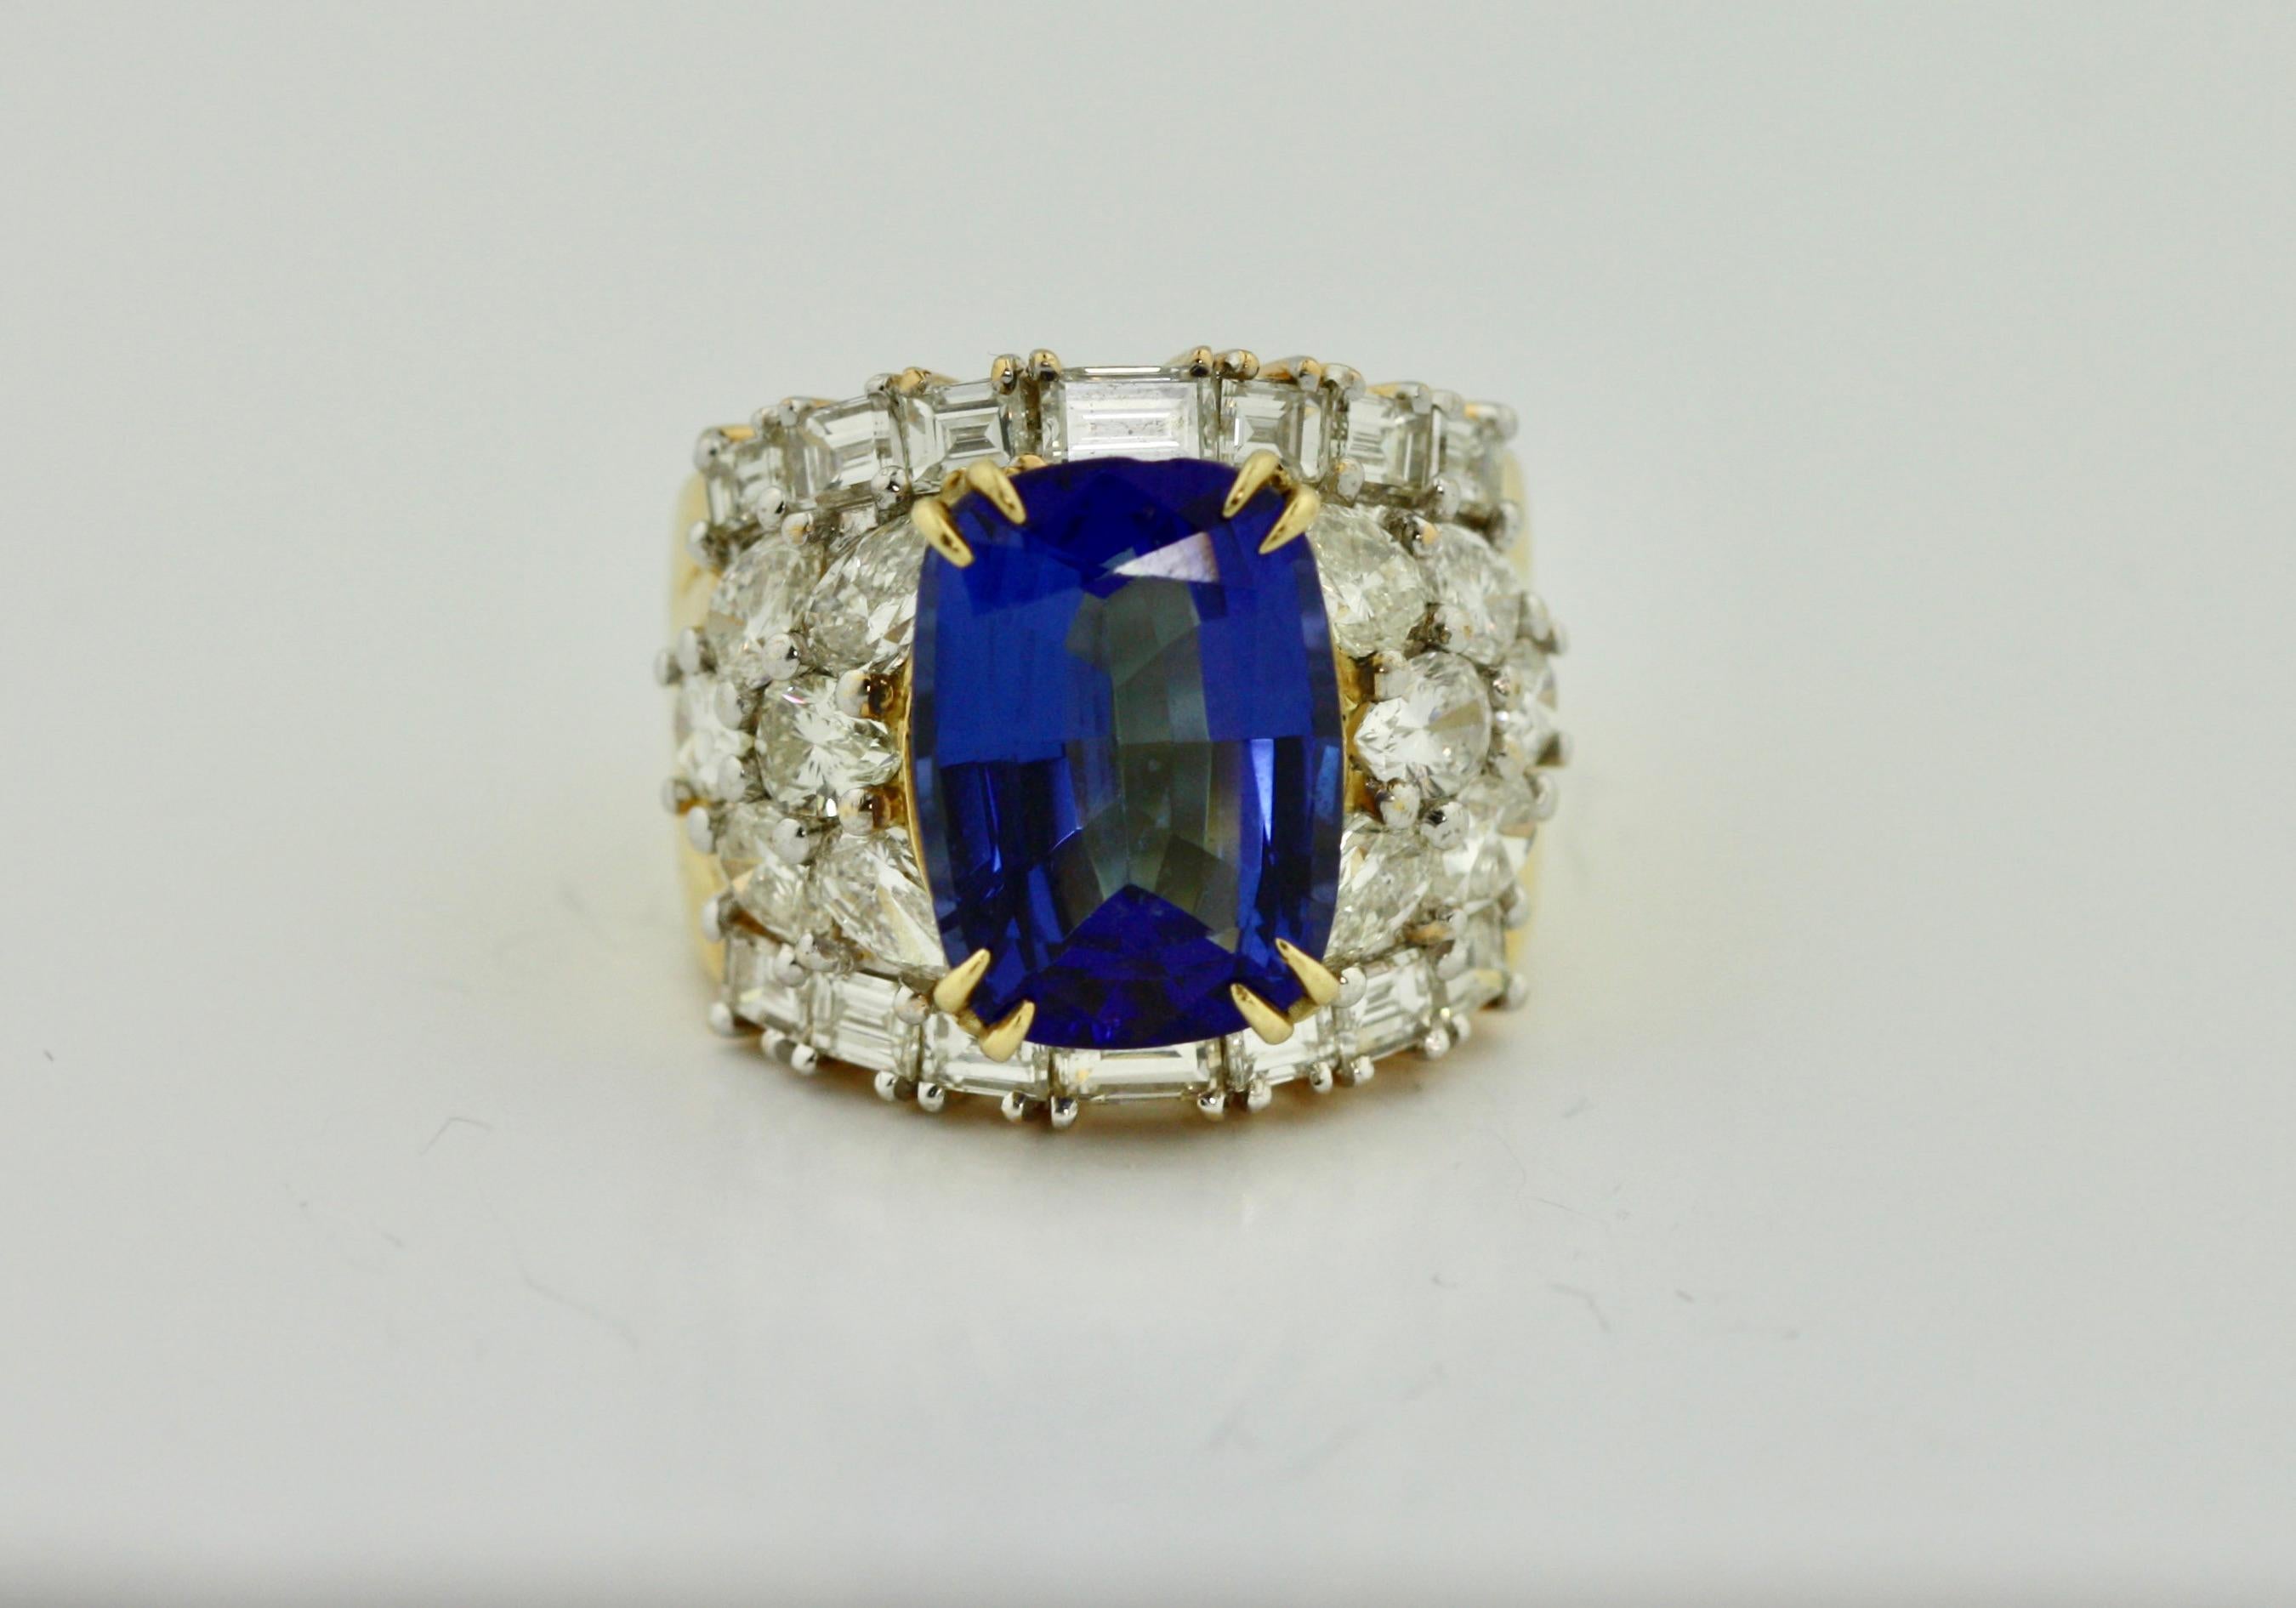 
18 kt Gold, Tanzanite and Diamond Ring 
Tanzanite weighing approximately 7.58 cts 
Diamonds weighing approximately 4.15 cts 
9.8 DWT (gross), size 4 